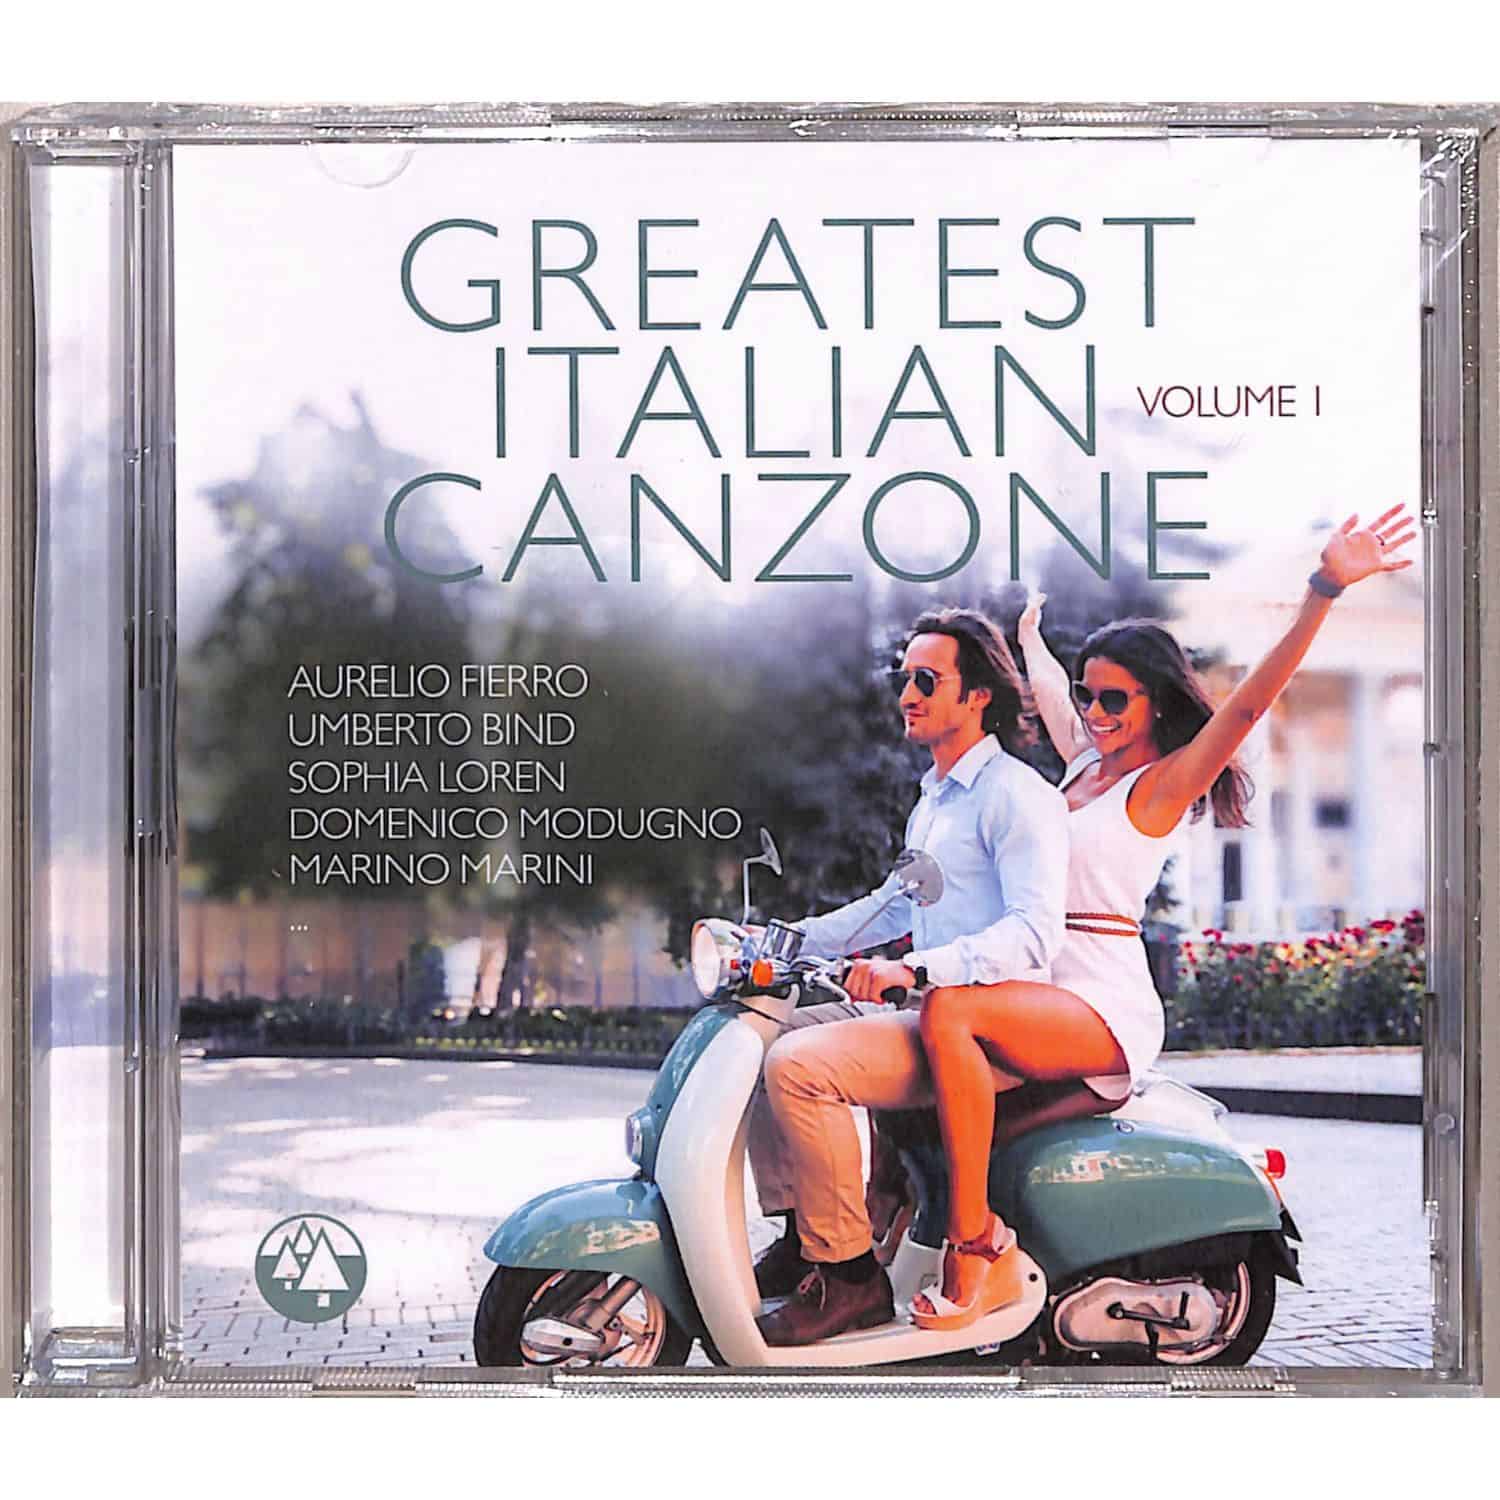 Various Artists - GREATEST ITALIAN CANZONE VOL. 1 